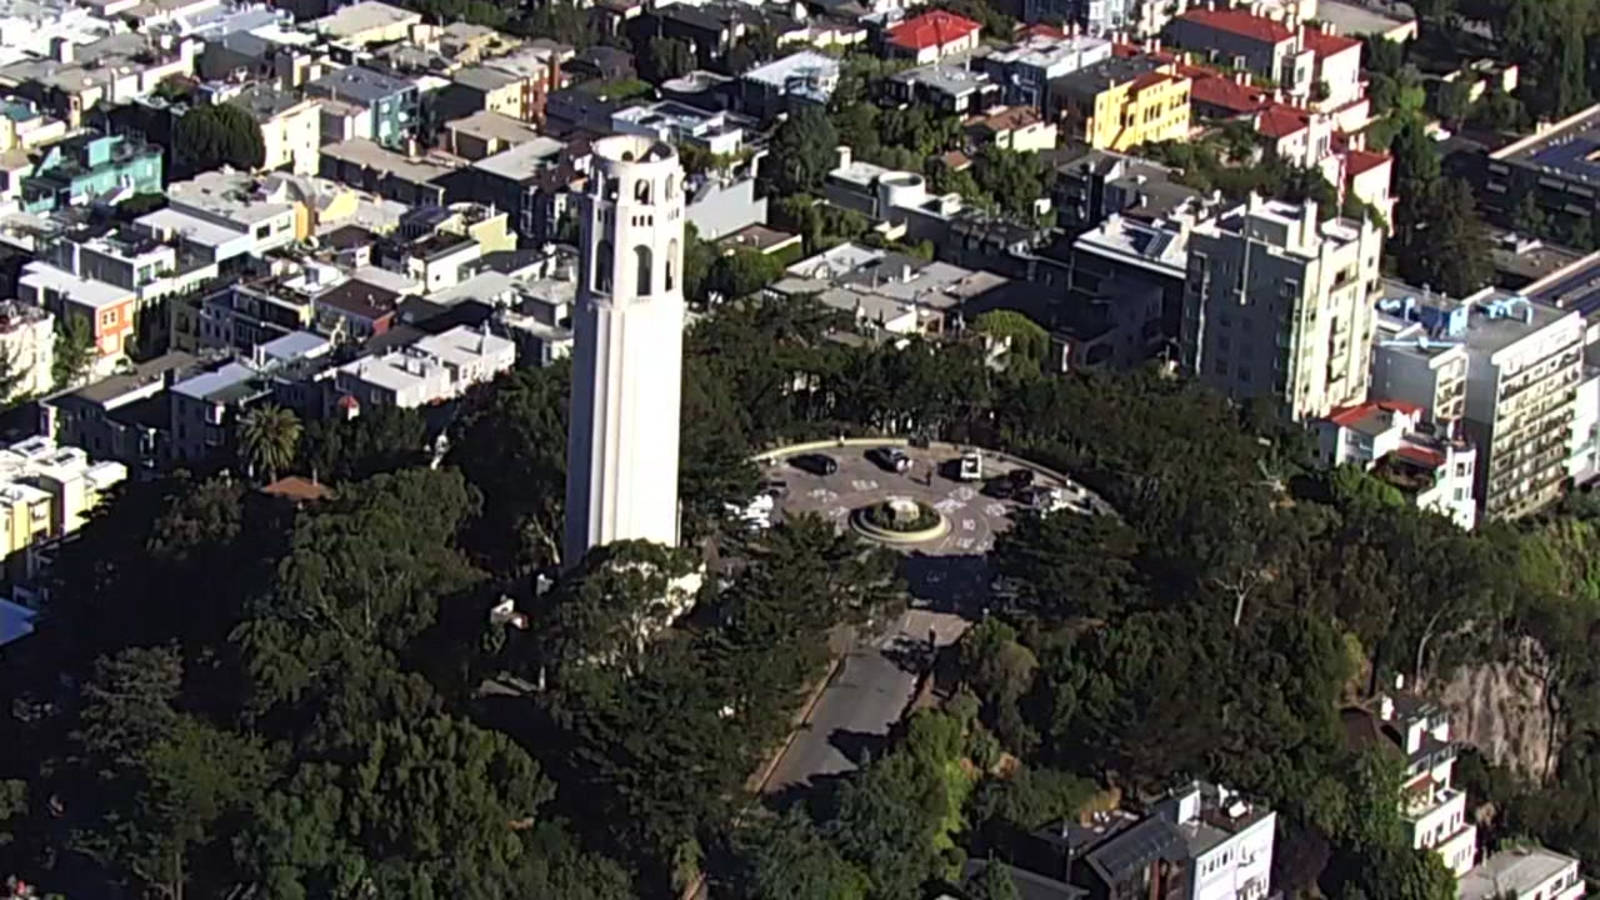 Get a bird's eye view of San Francisco’s iconic Coit Tower Wallpaper